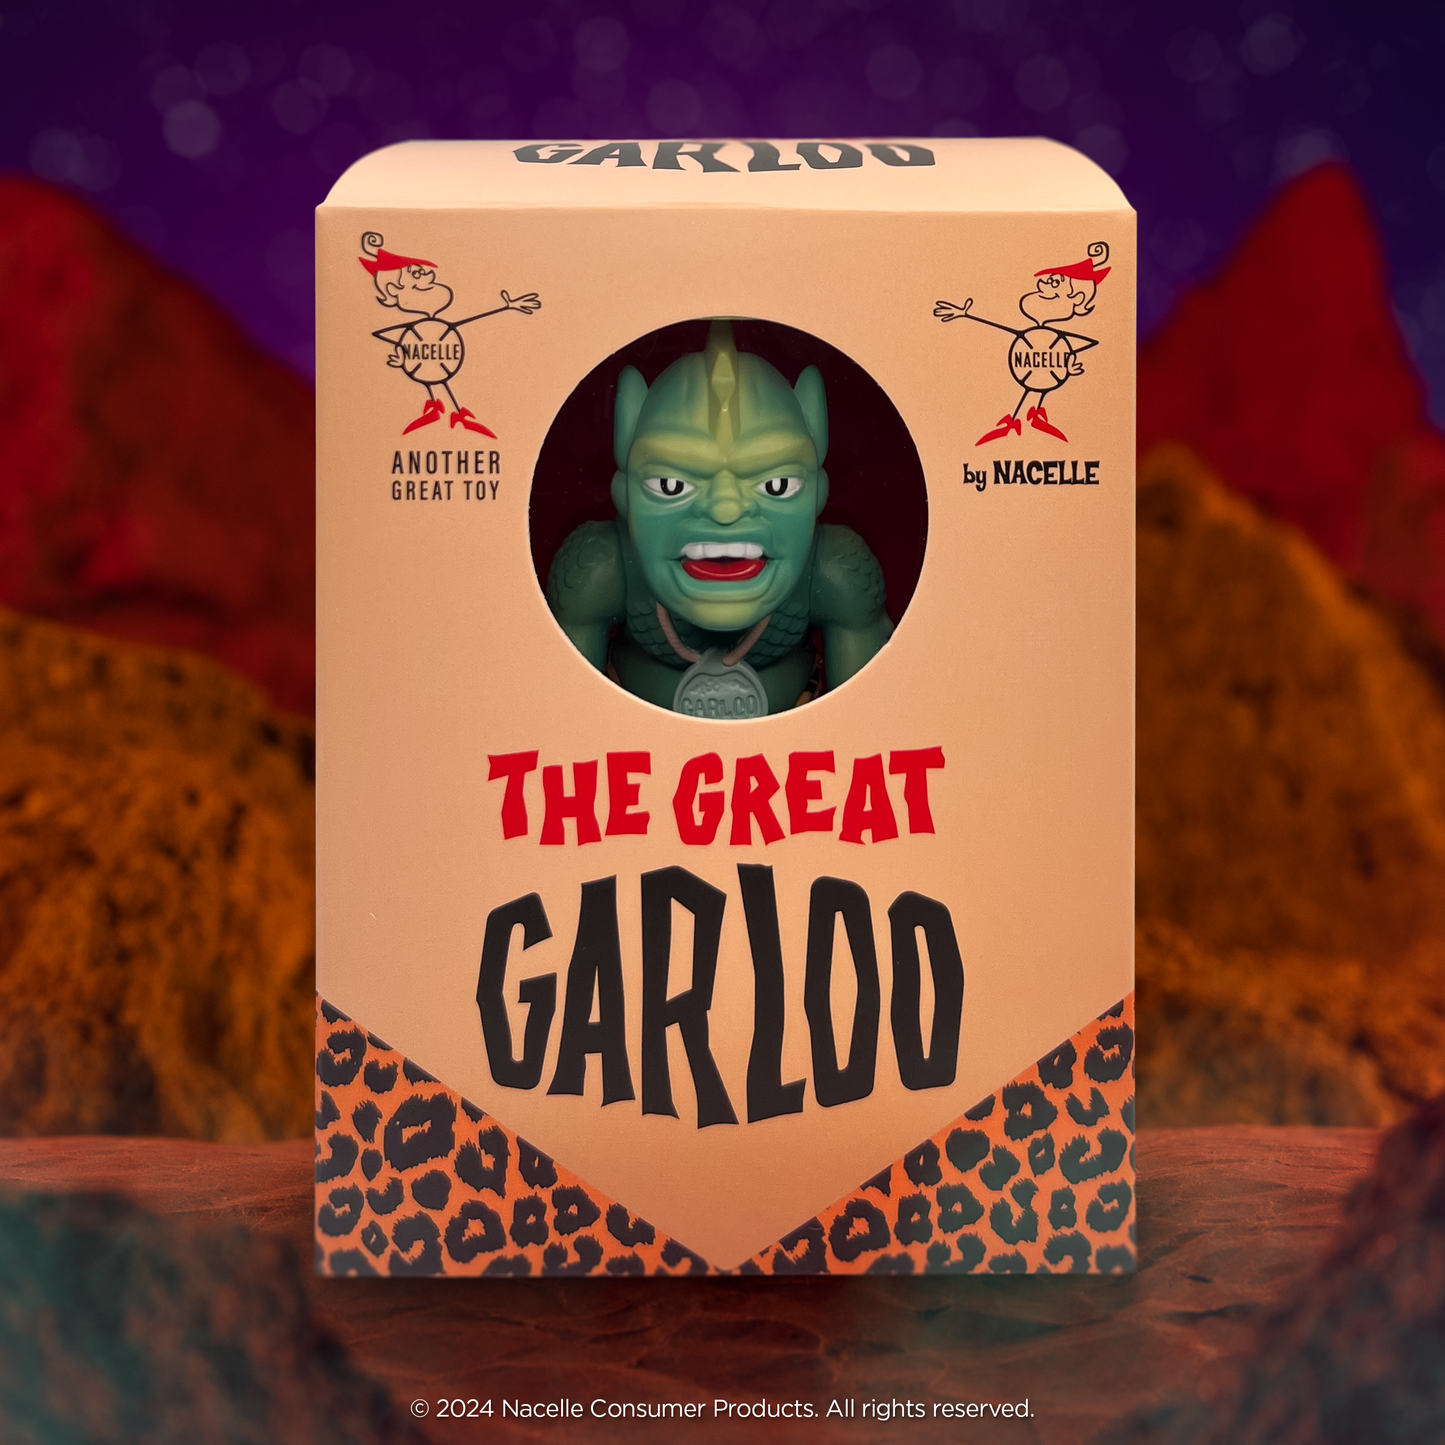 The Great Garloo Action Figure